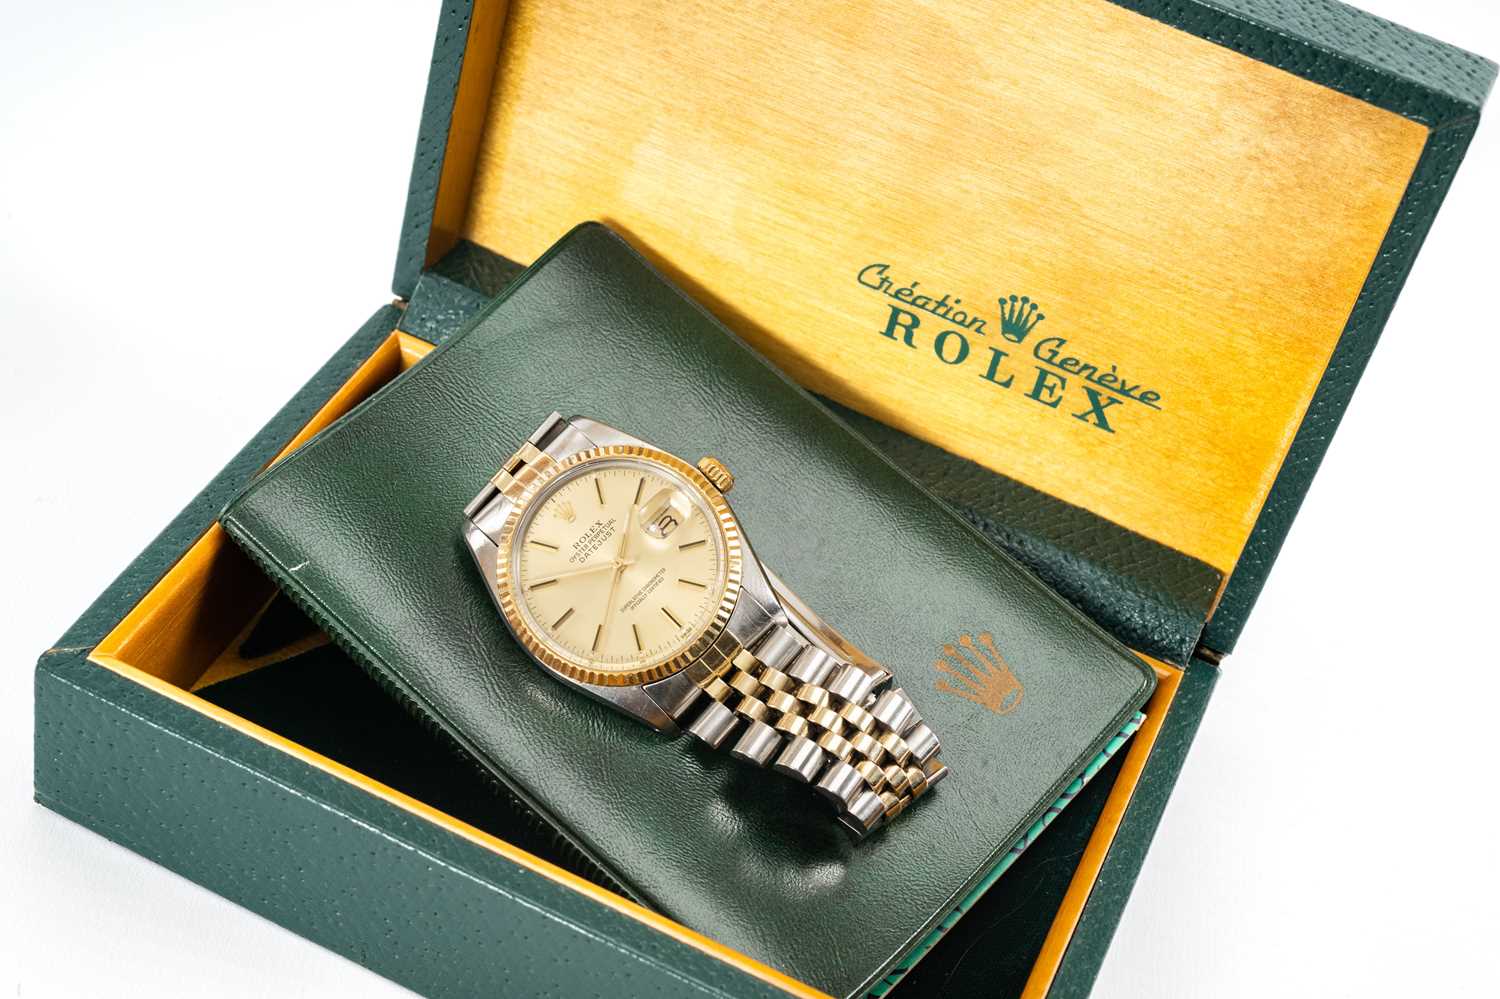 ROLEX DATEJUST GOLD & STAINLESS STEEL AUTOMATIC CALENDAR WRISTWATCH, c.1980 , Ref. 16013, ser. no. - Image 2 of 4